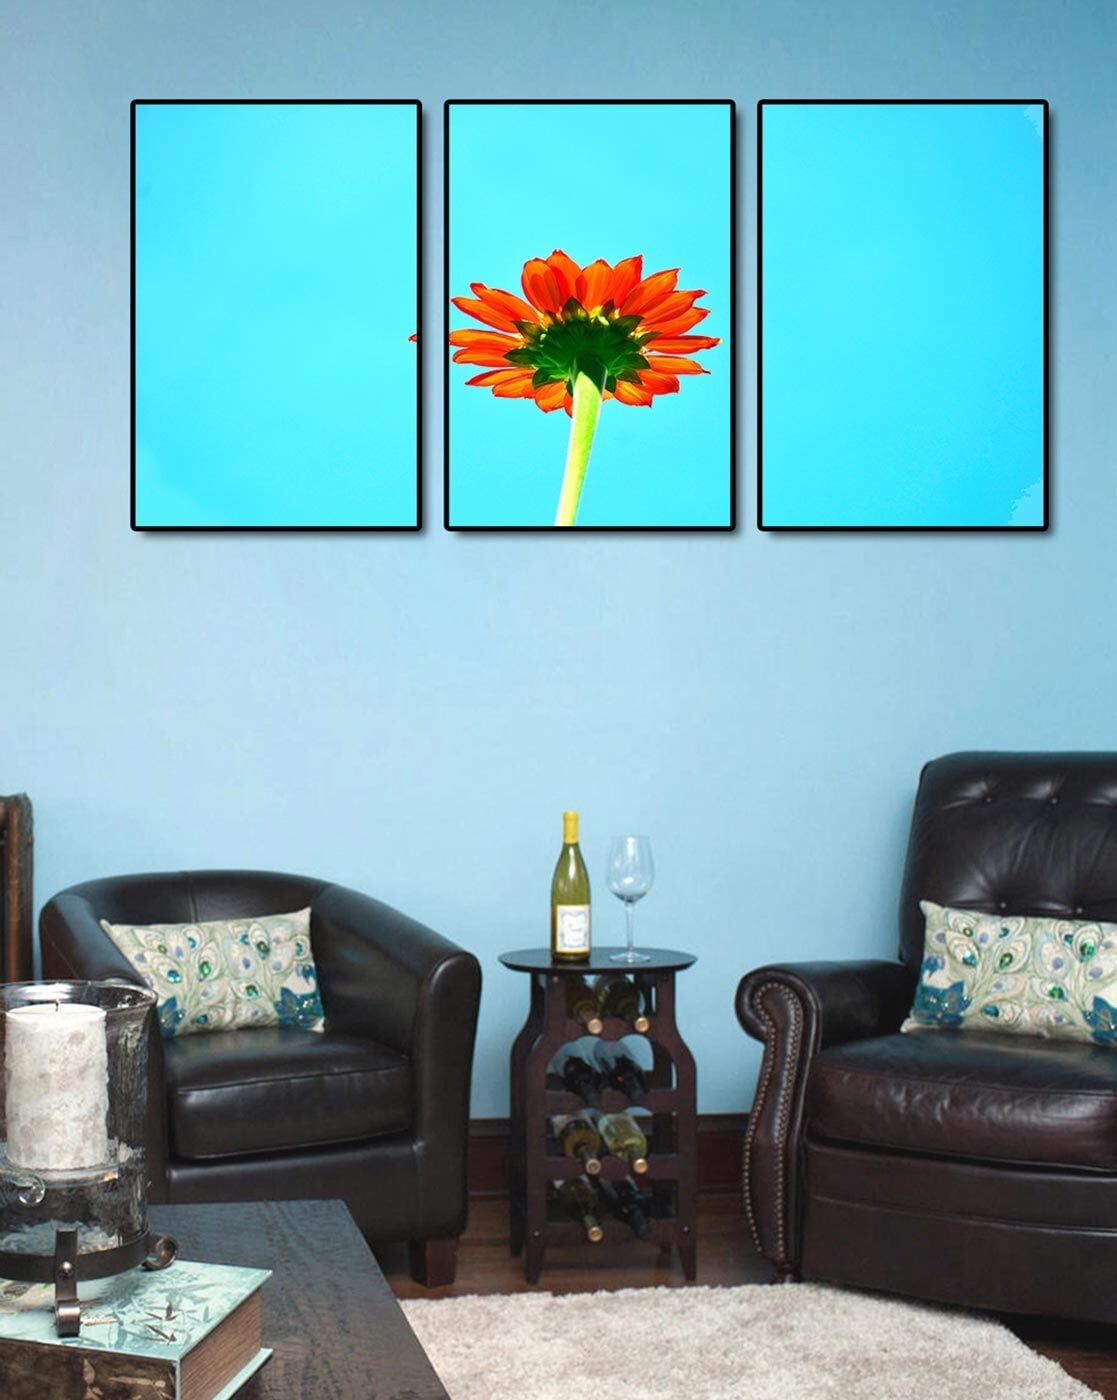 Buy Blue Wall & Table Decor for Home & Kitchen by 999store Online